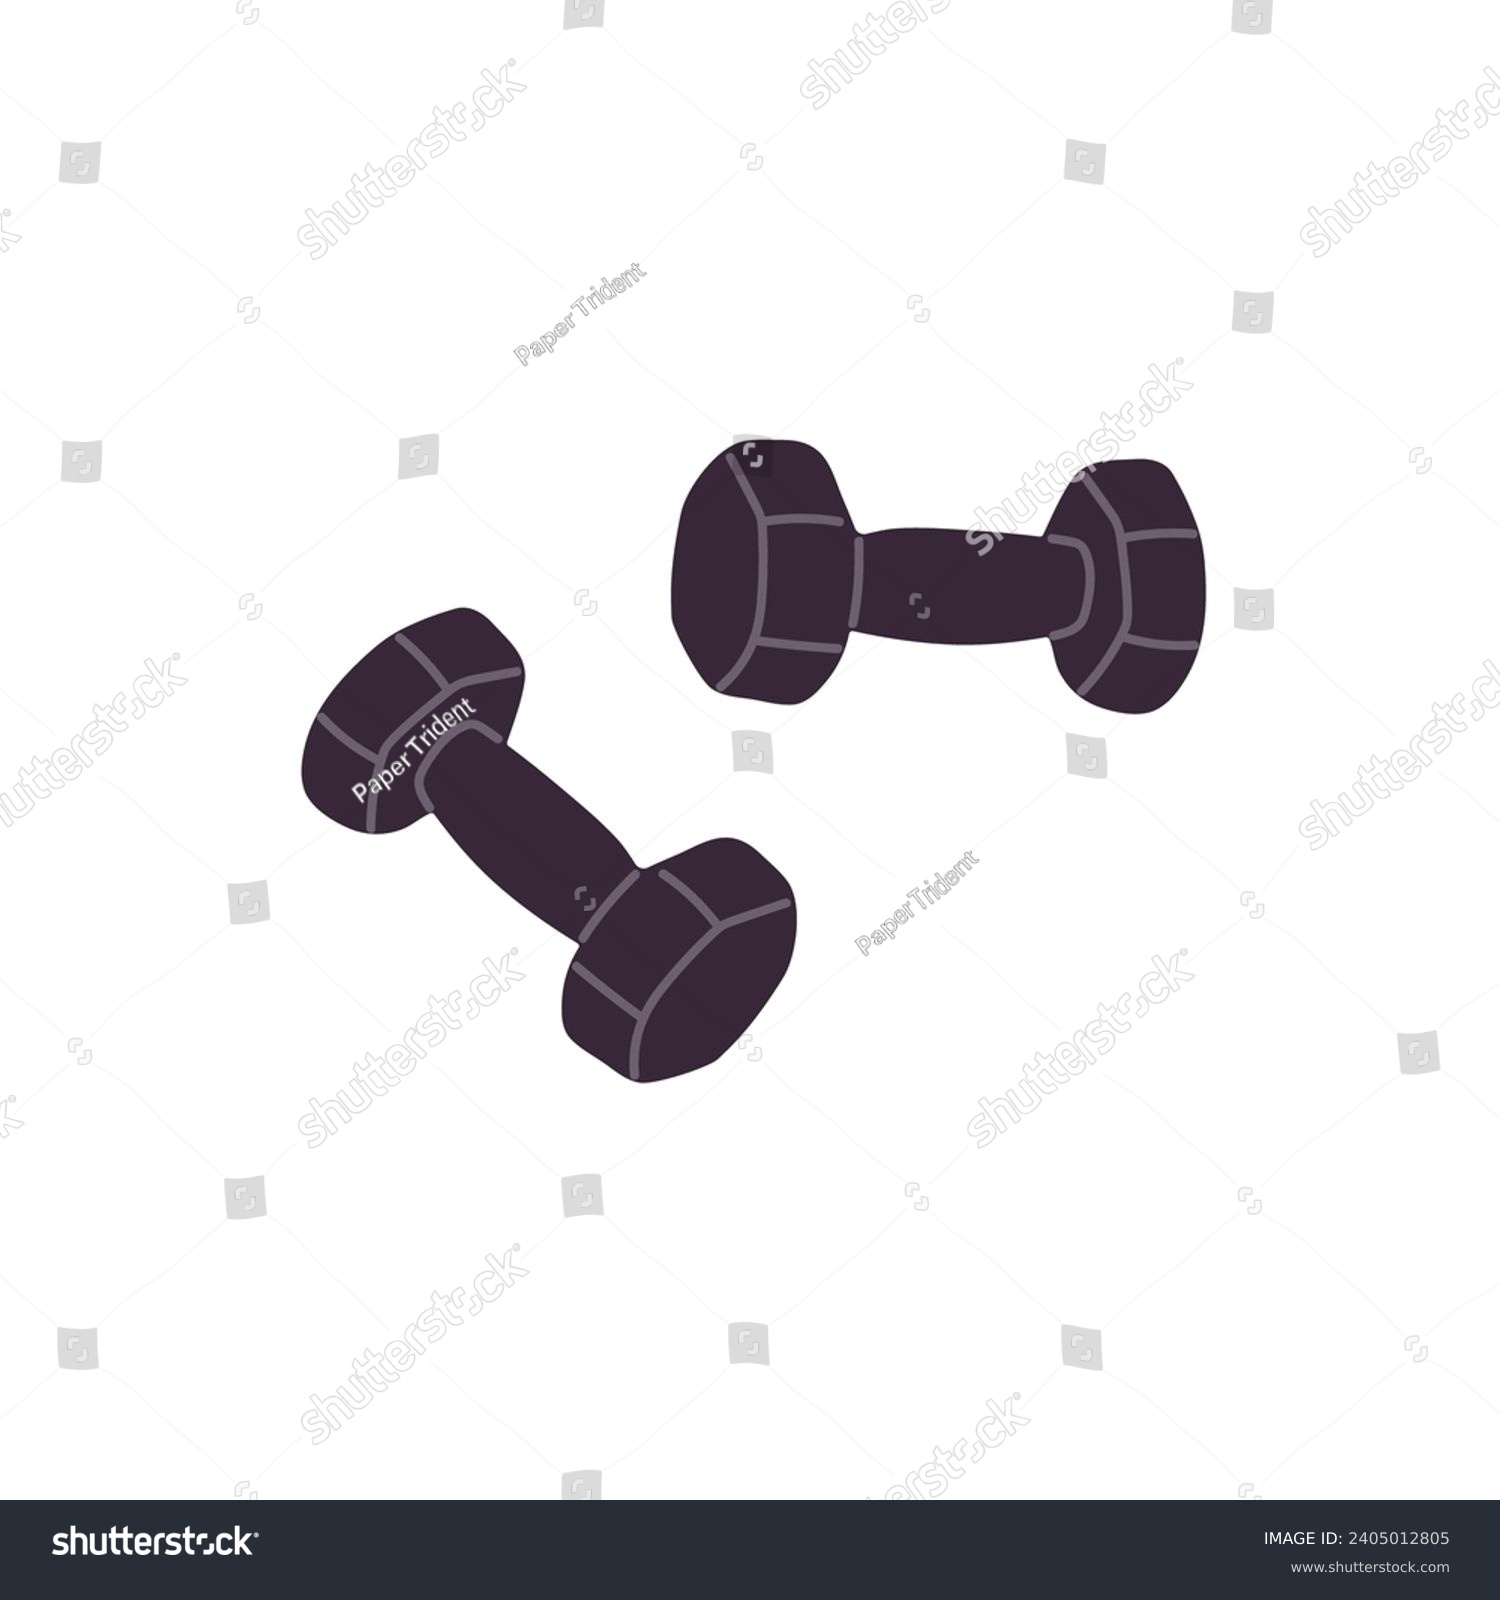 SVG of Lightweight barbells for fitness exercises. Dumbbells for strength training, weightlifting. Weight apparatus to pump muscles. Sports equipment. Flat isolated vector illustration on white background svg